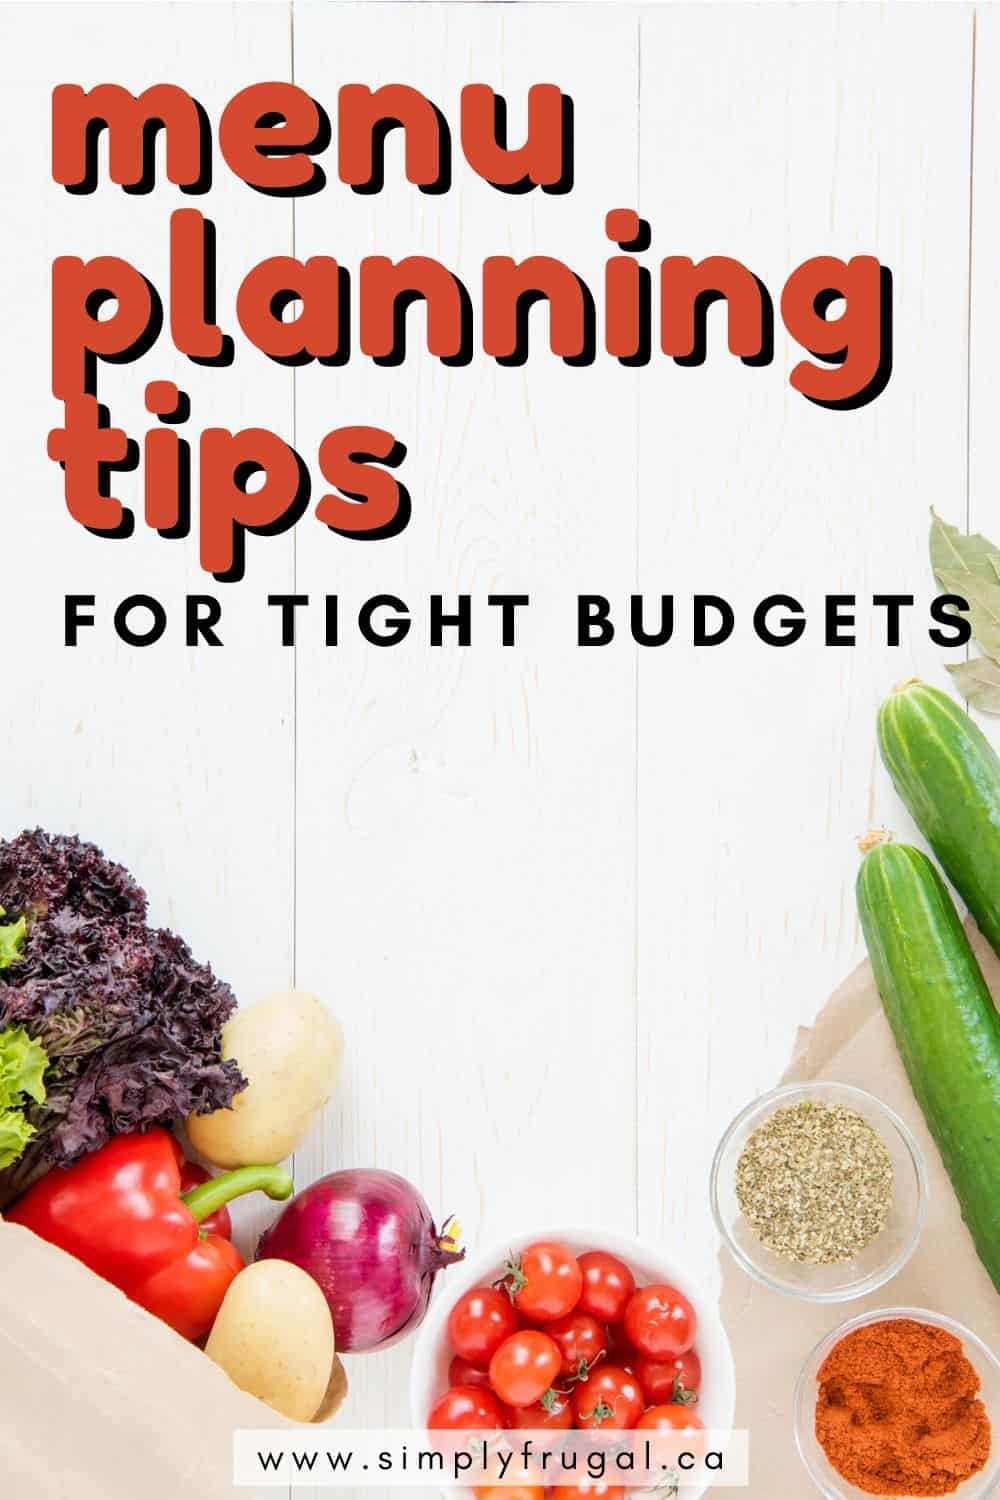 Menu planning tips for tight budgets